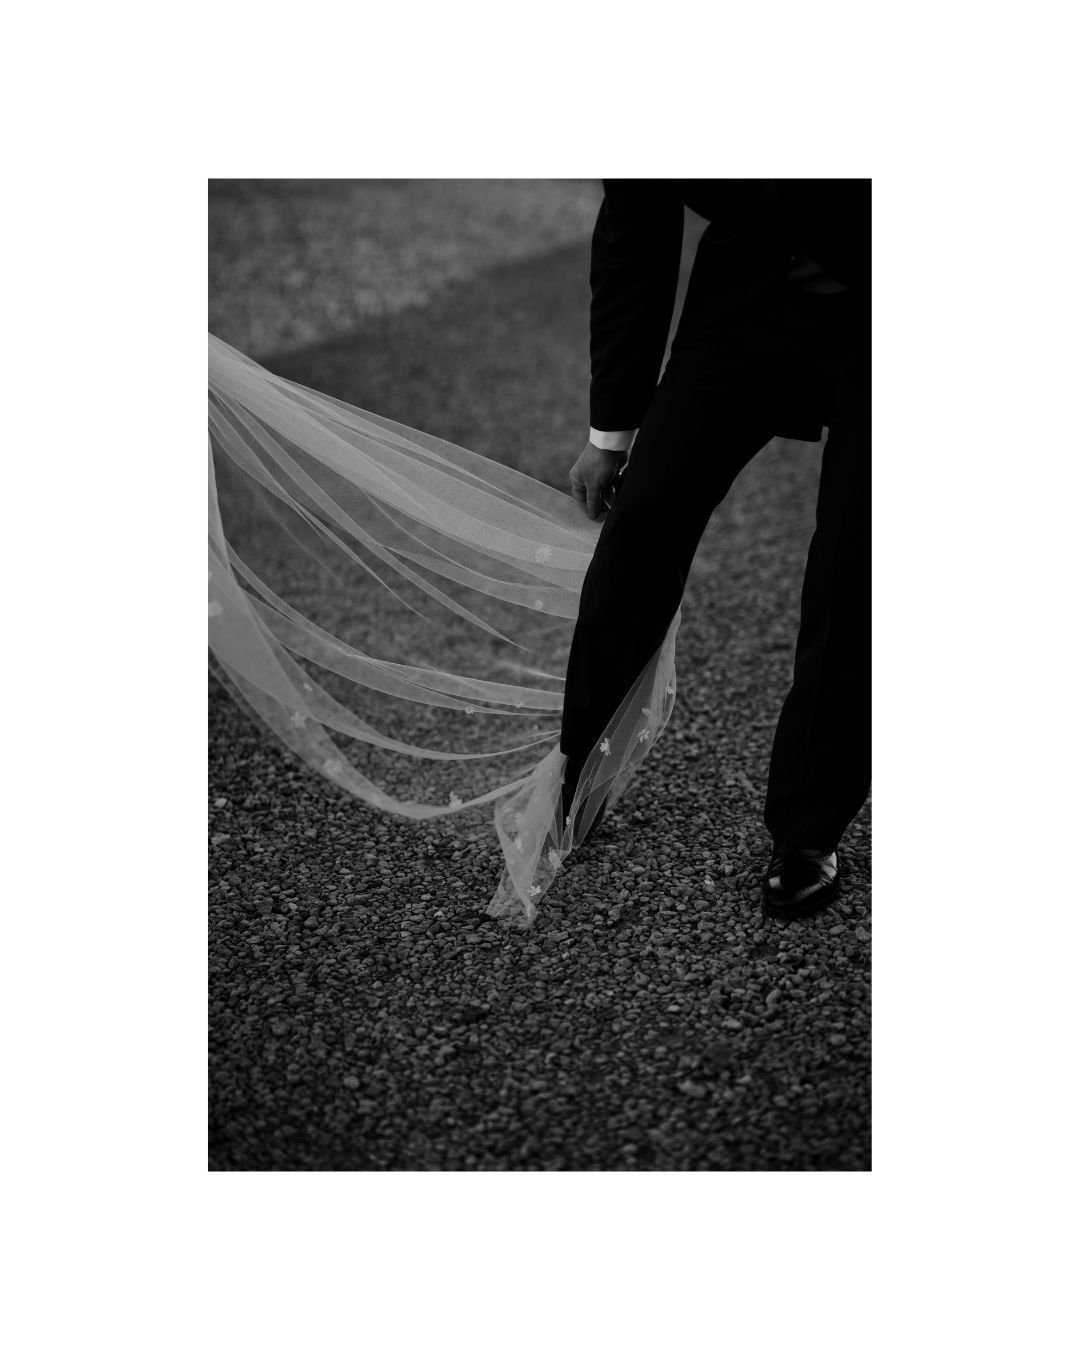 WIND⁠
.⁠
During Kelly and Tom's portrait session, nature decided to join in the fun, as Kelly's veil wrapped around Tom's leg. This spontaneous little moment did not go unnoticed and now adds a touch of humour to their gallery, while also serving as 